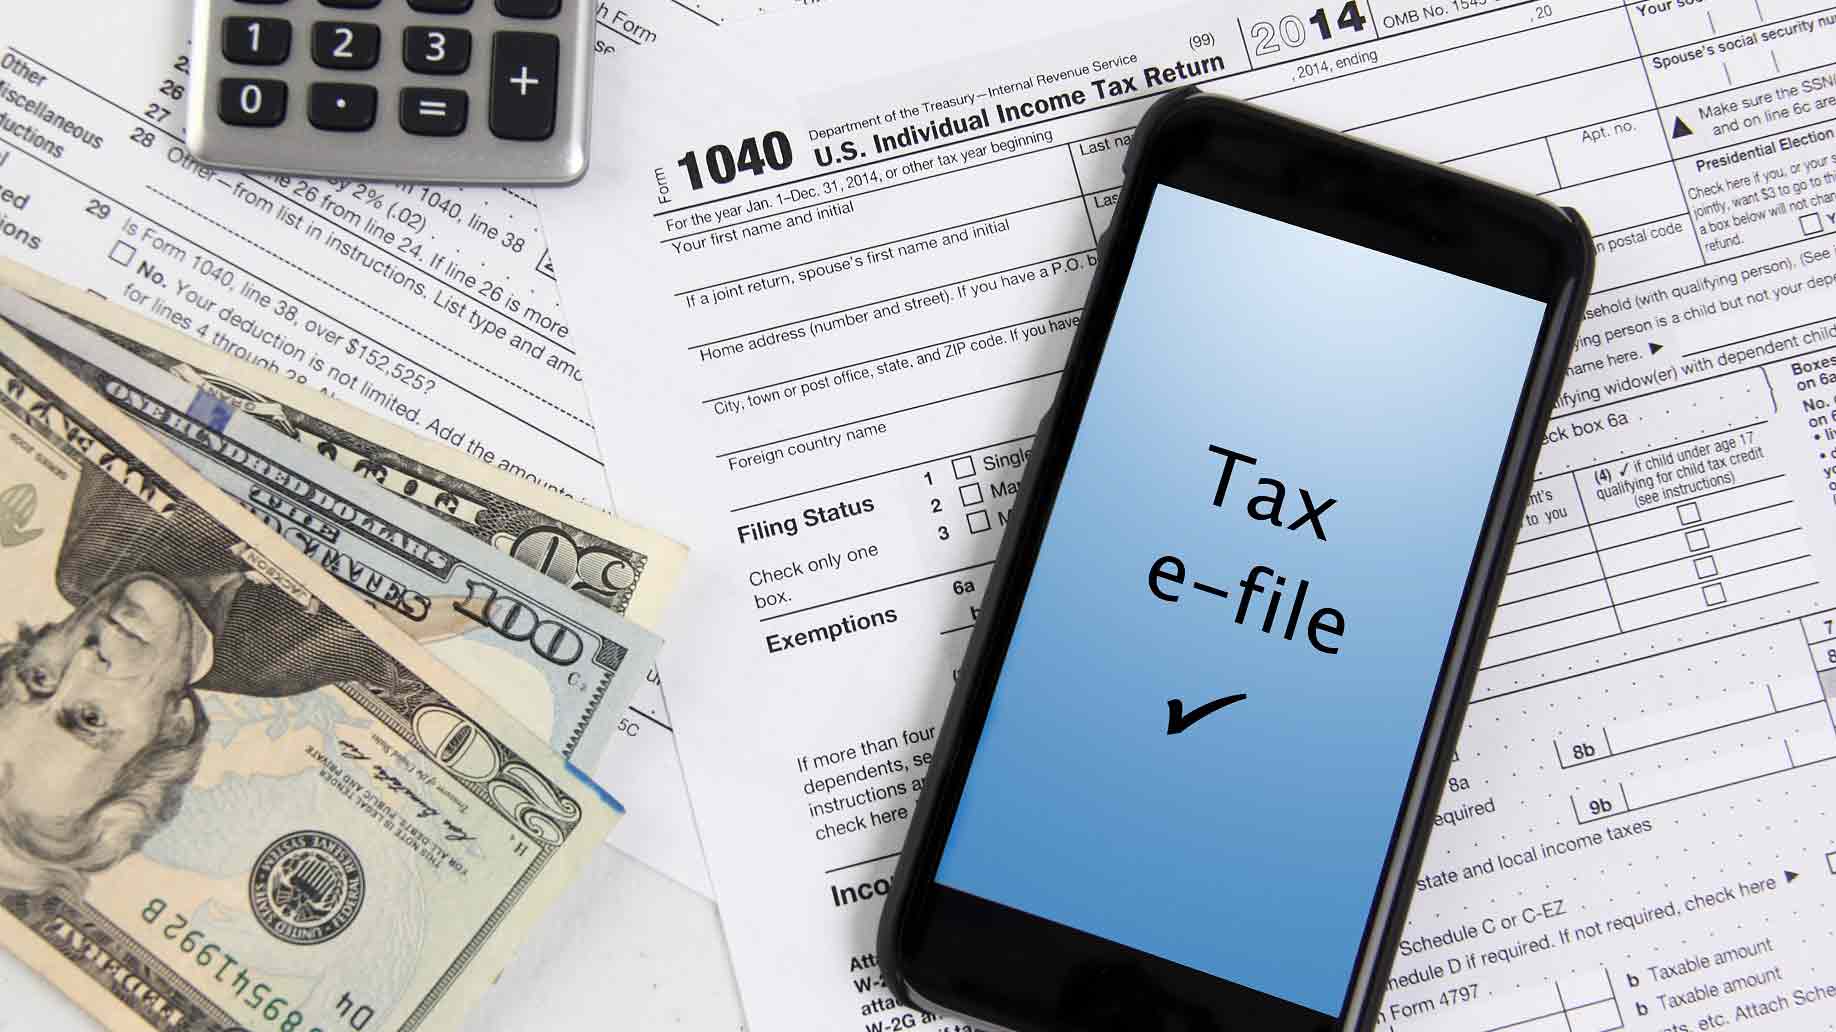 How to Pay Federal Estimated Taxes Online to the IRS